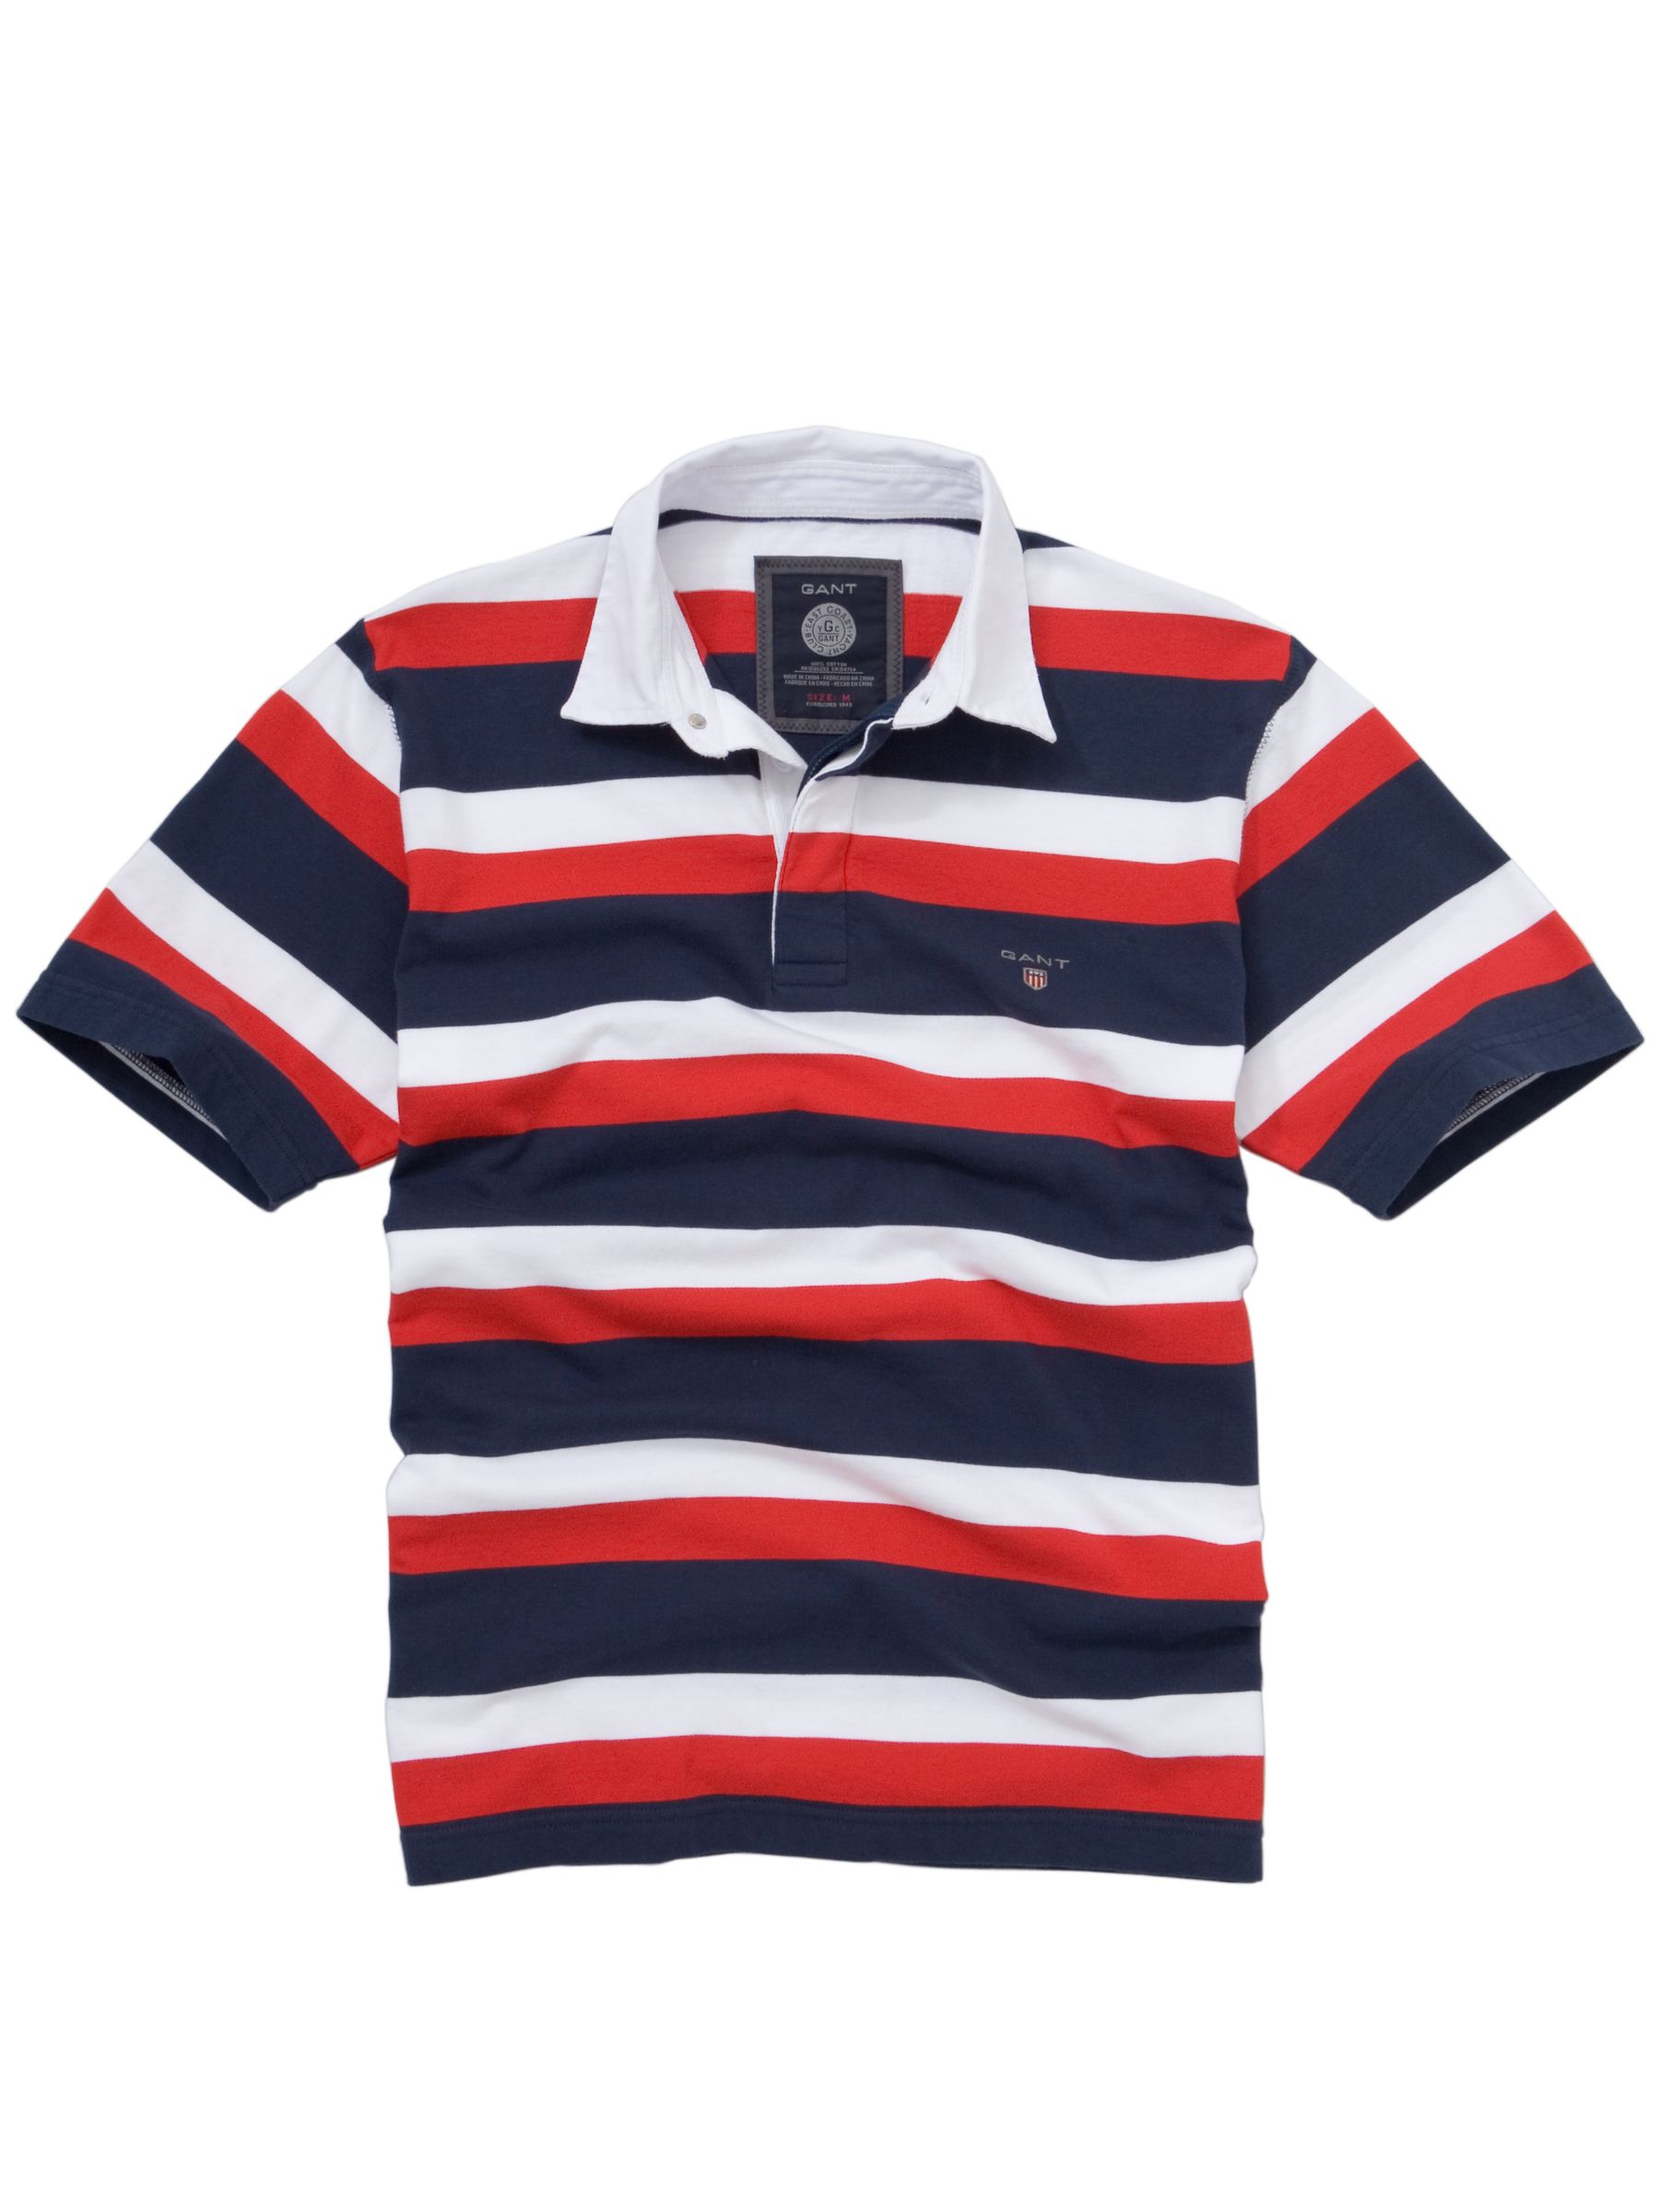 Multi Bar Stripe Rugby Shirt, French Navy/Red